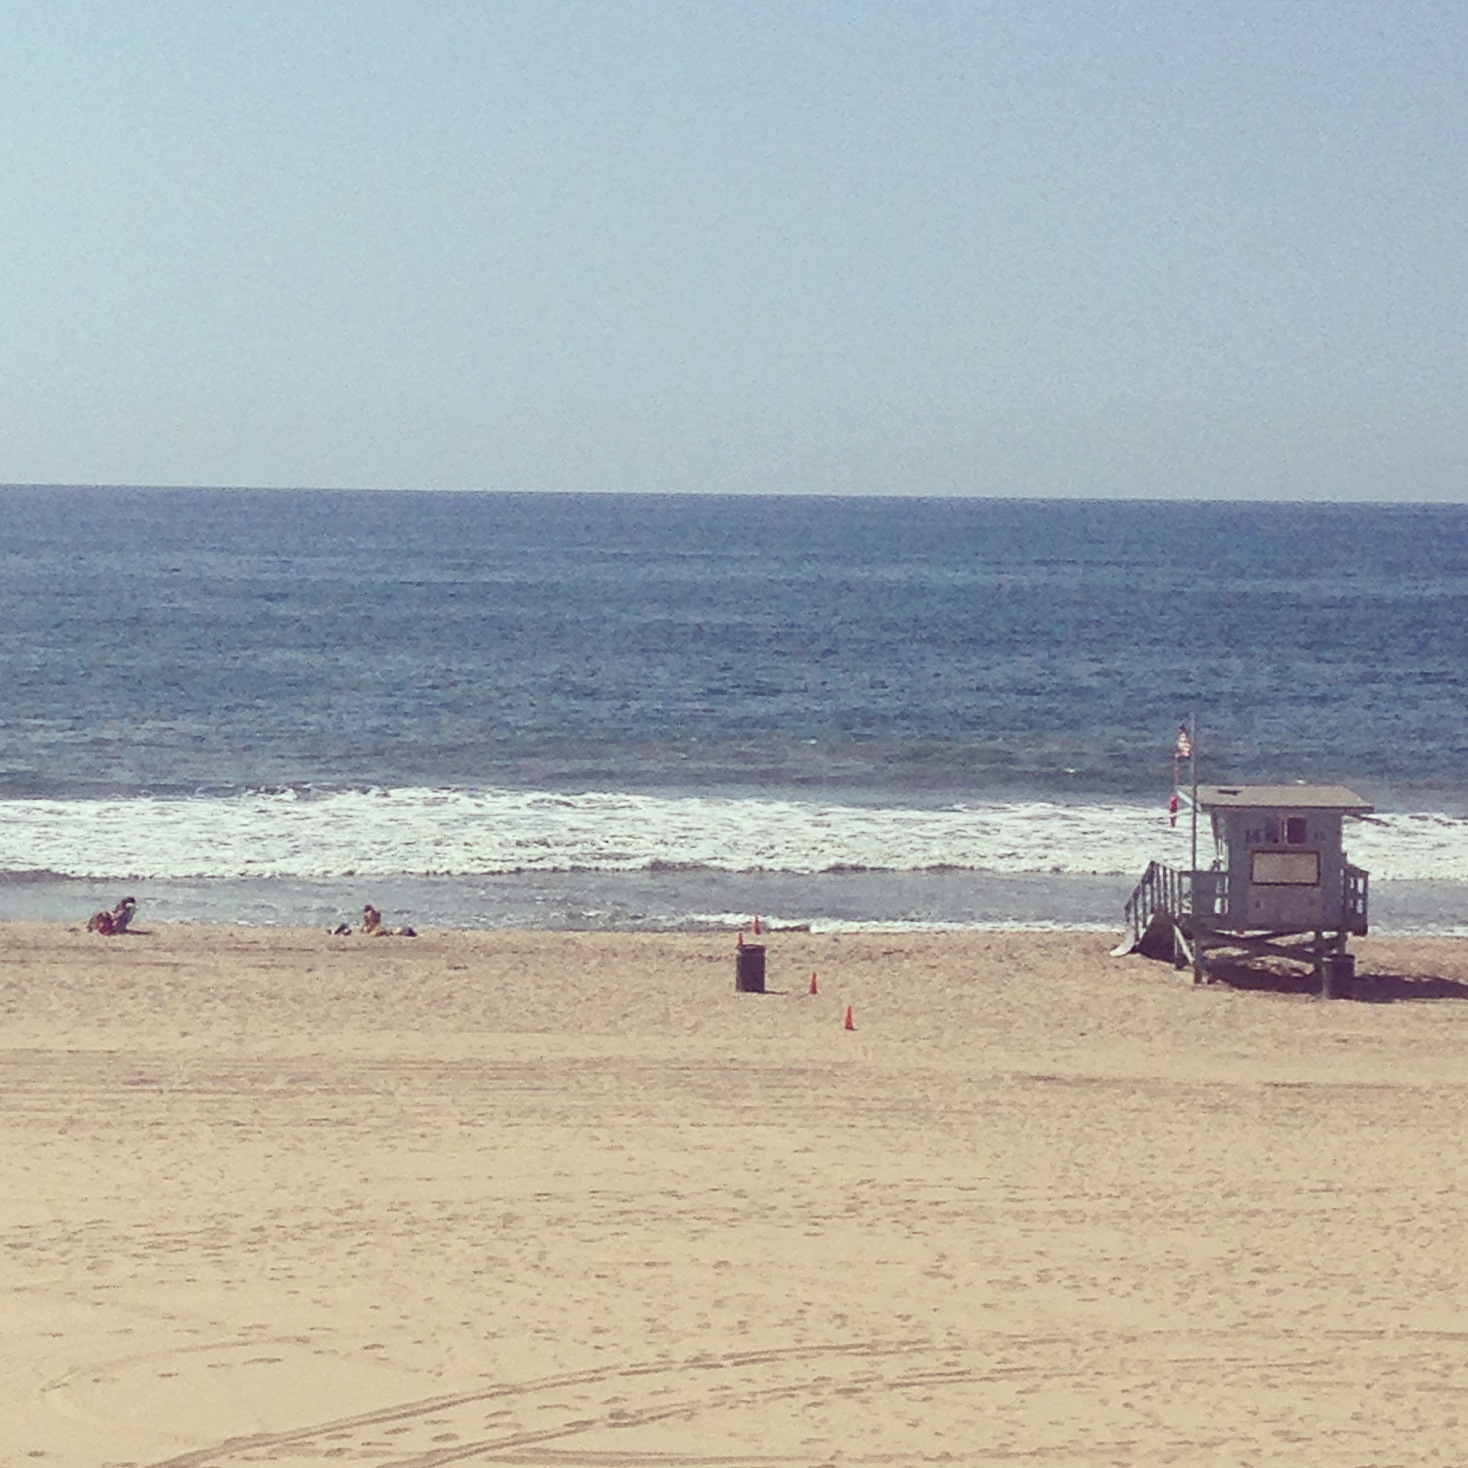 Although Los Angeles isn't exactly known for its beaches, they're still worth checking out.